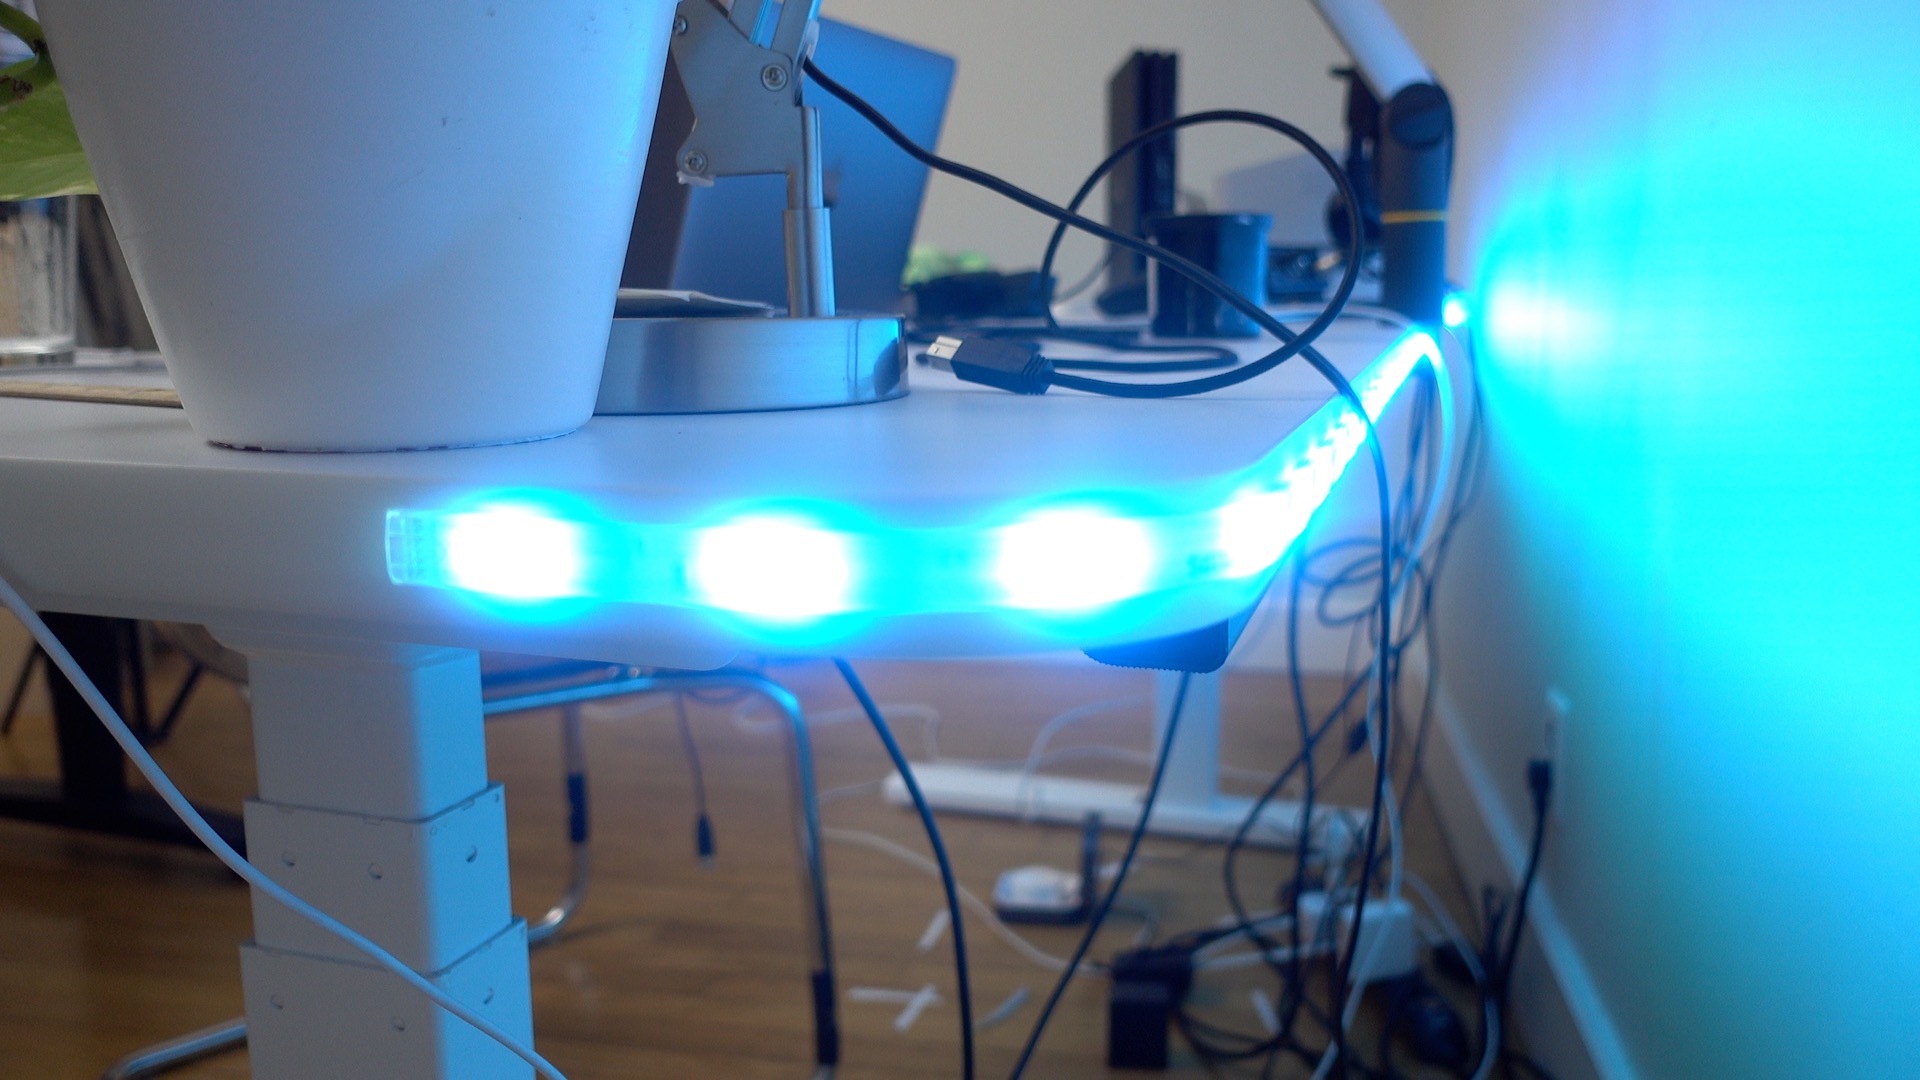 hue-lightstrip-plus-finished-install